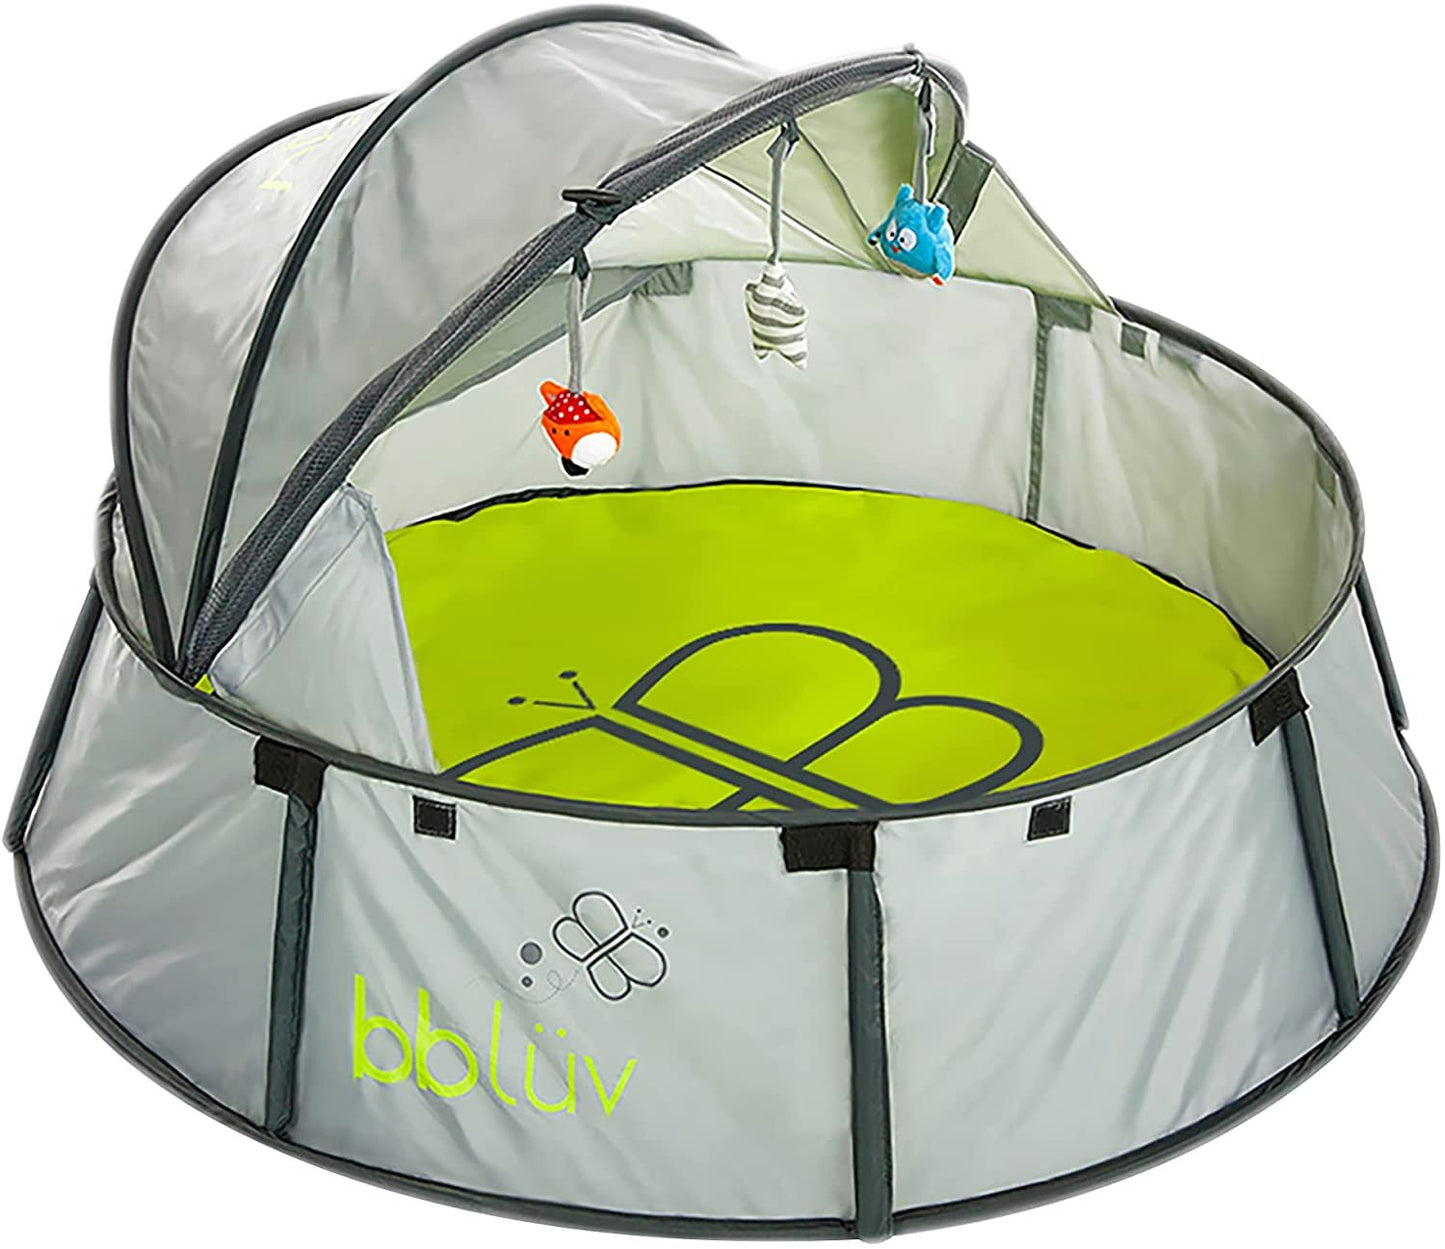 bblüv - Nidö Mini - 2-in-1 Compact Travel & Play Tent - Fun Canopy with UV Protection